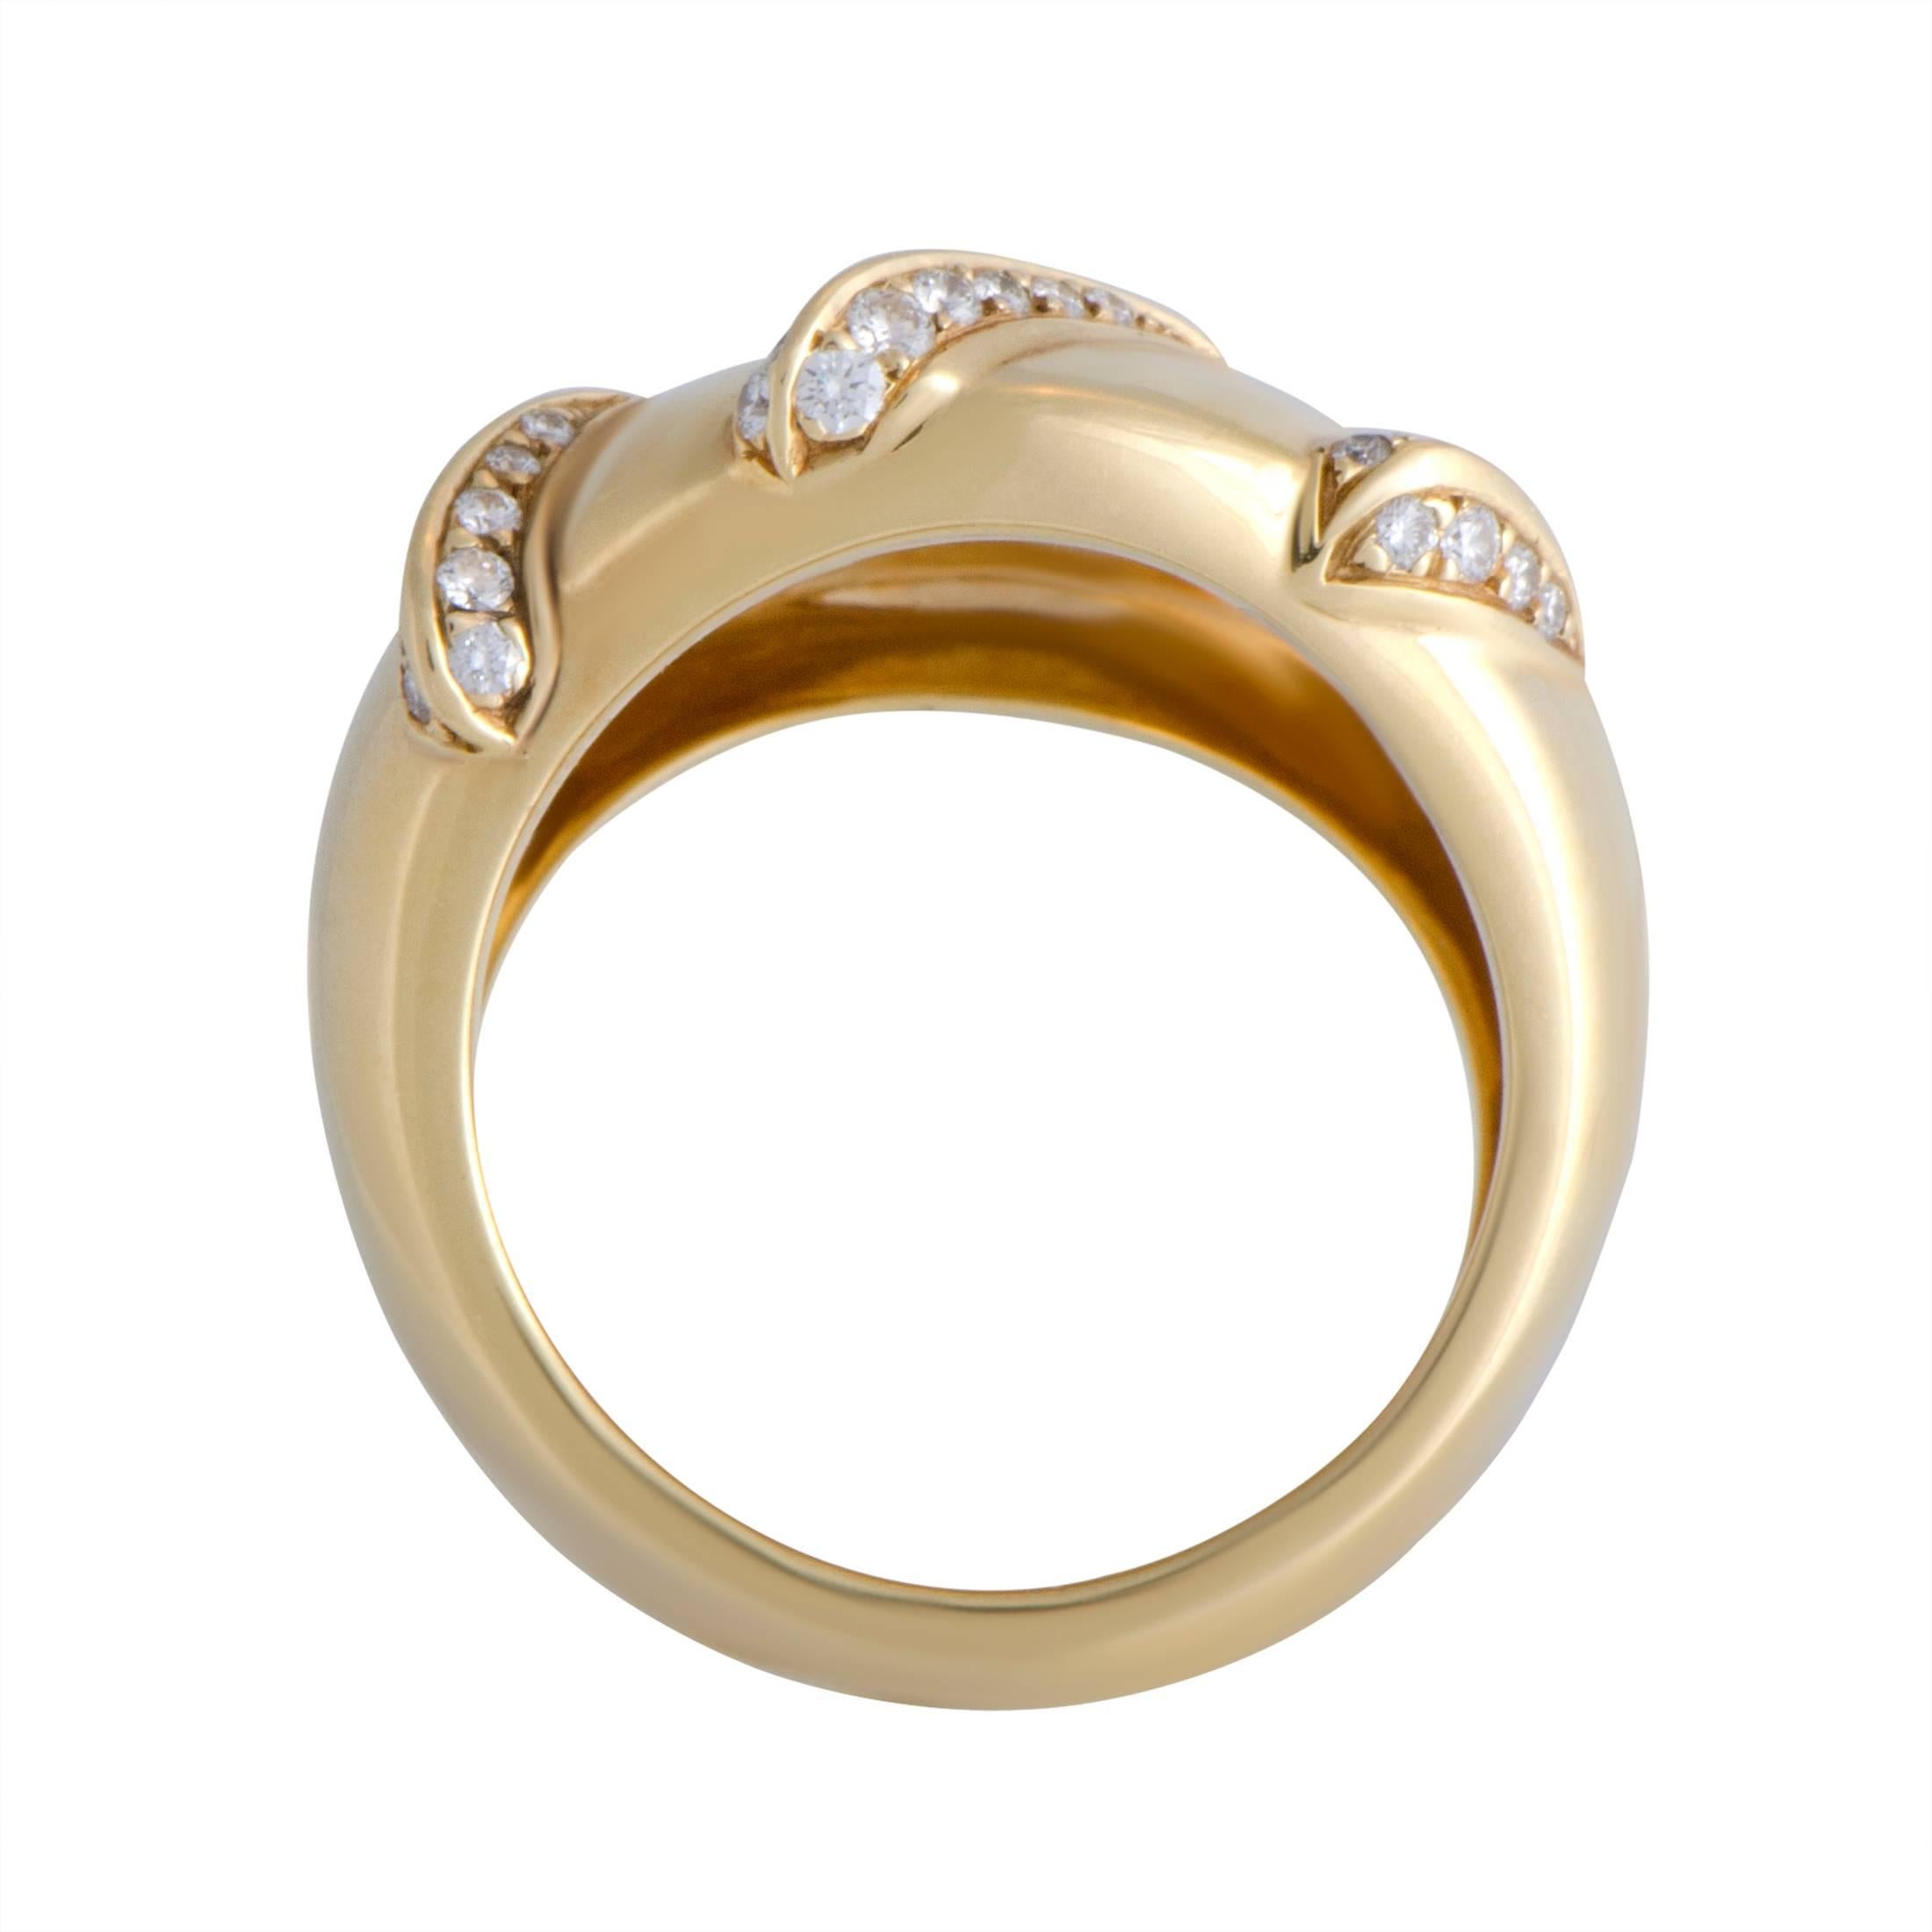 Boasting a gloriously offbeat and exceptionally intriguing spirit in the brand’s renowned fashion of impeccable execution and utmost refinement, this majestic ring from Cartier is made of 18K yellow gold with glistening diamonds weighing in total